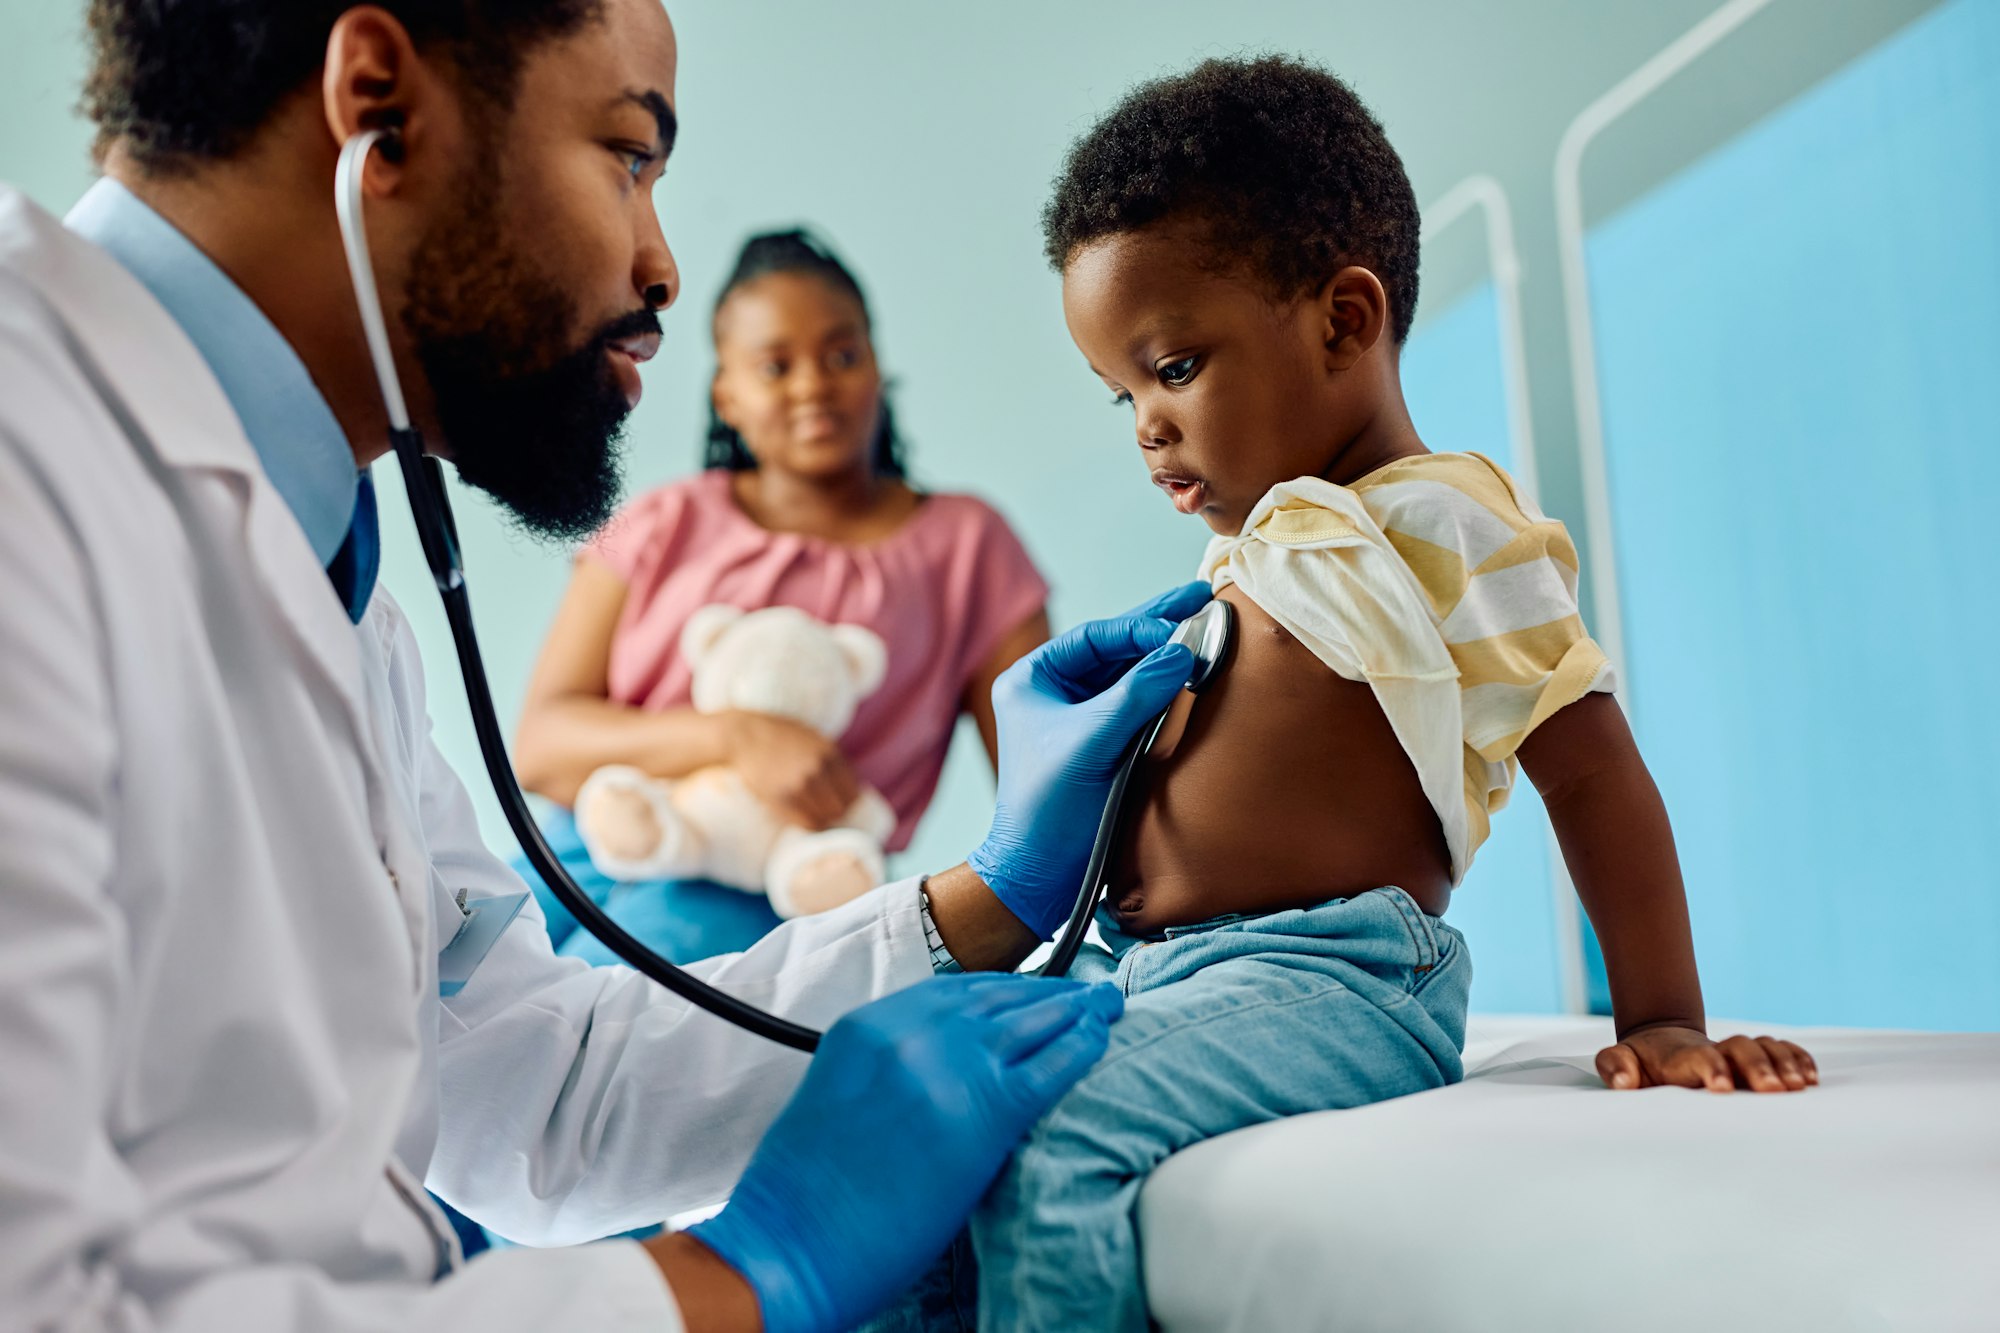 Small black kid being examined with stethoscope during medical checkup at pediatrician's.